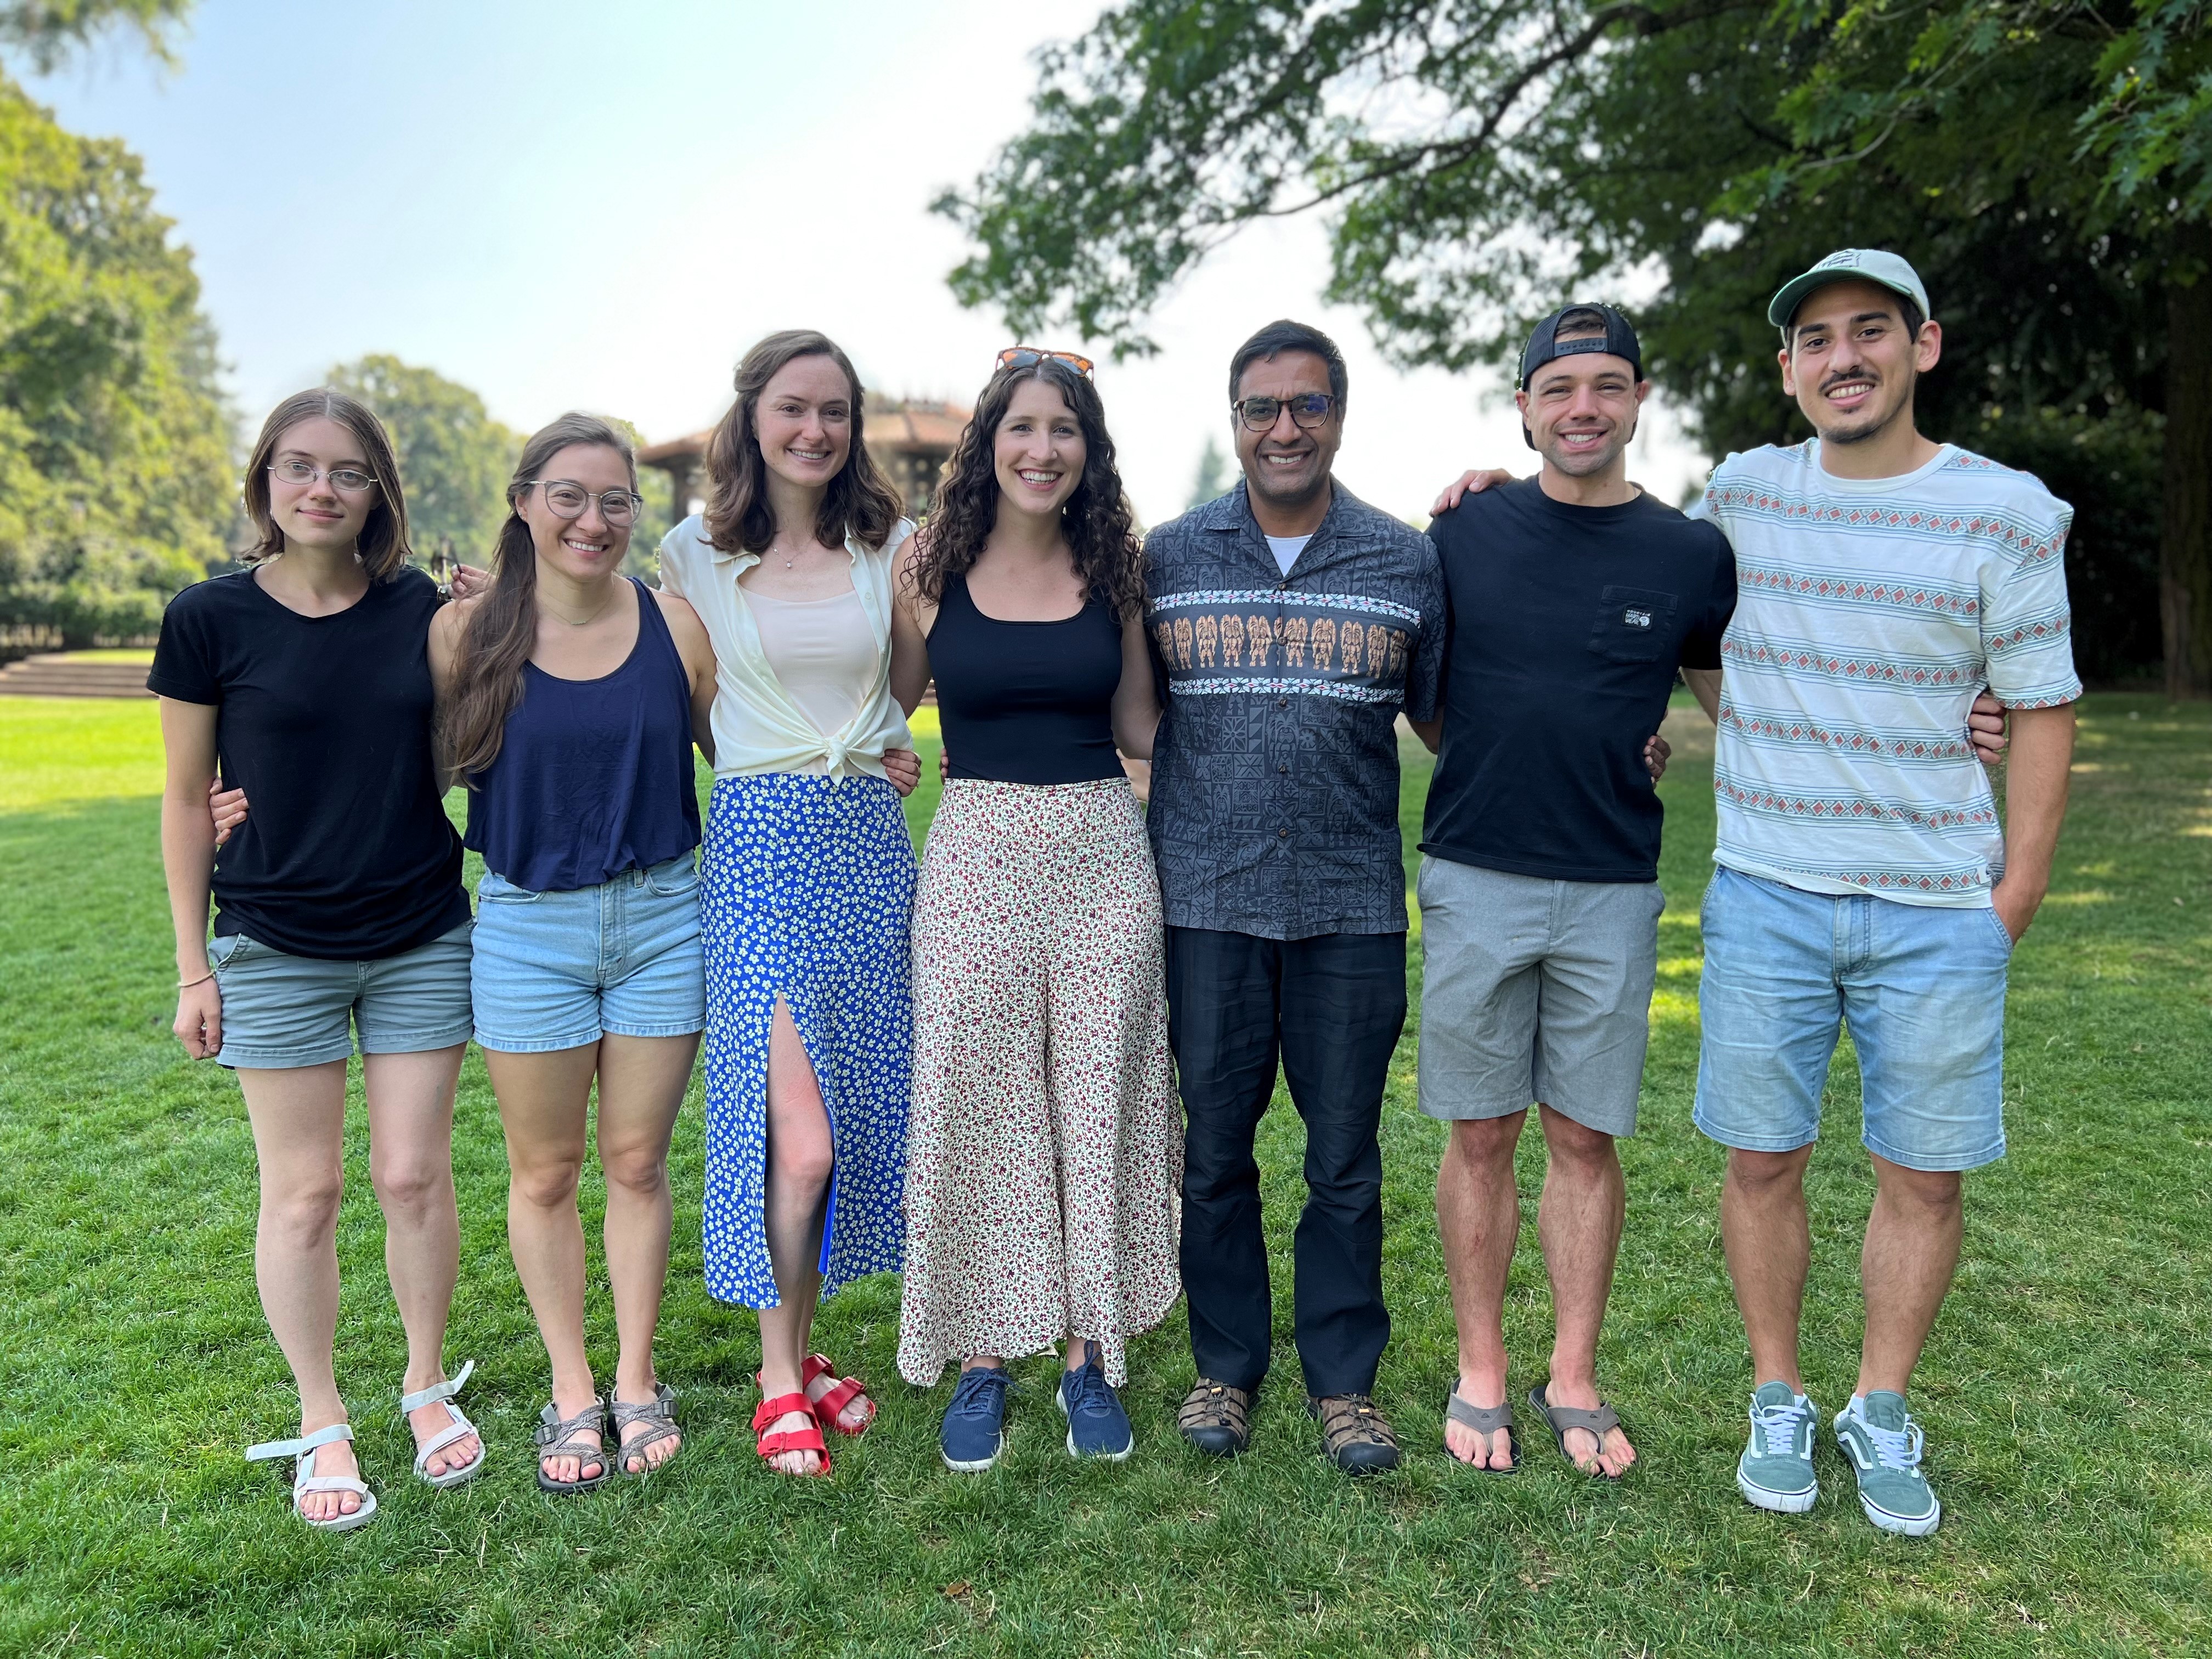 Current members of the Unni lab. From left to right, Anna Bowman, Moriah Arnold, Jessica Keating, Elizabeth Rose, Vivek Unni, Elias Wisdom, and Carlos Soto Faguas